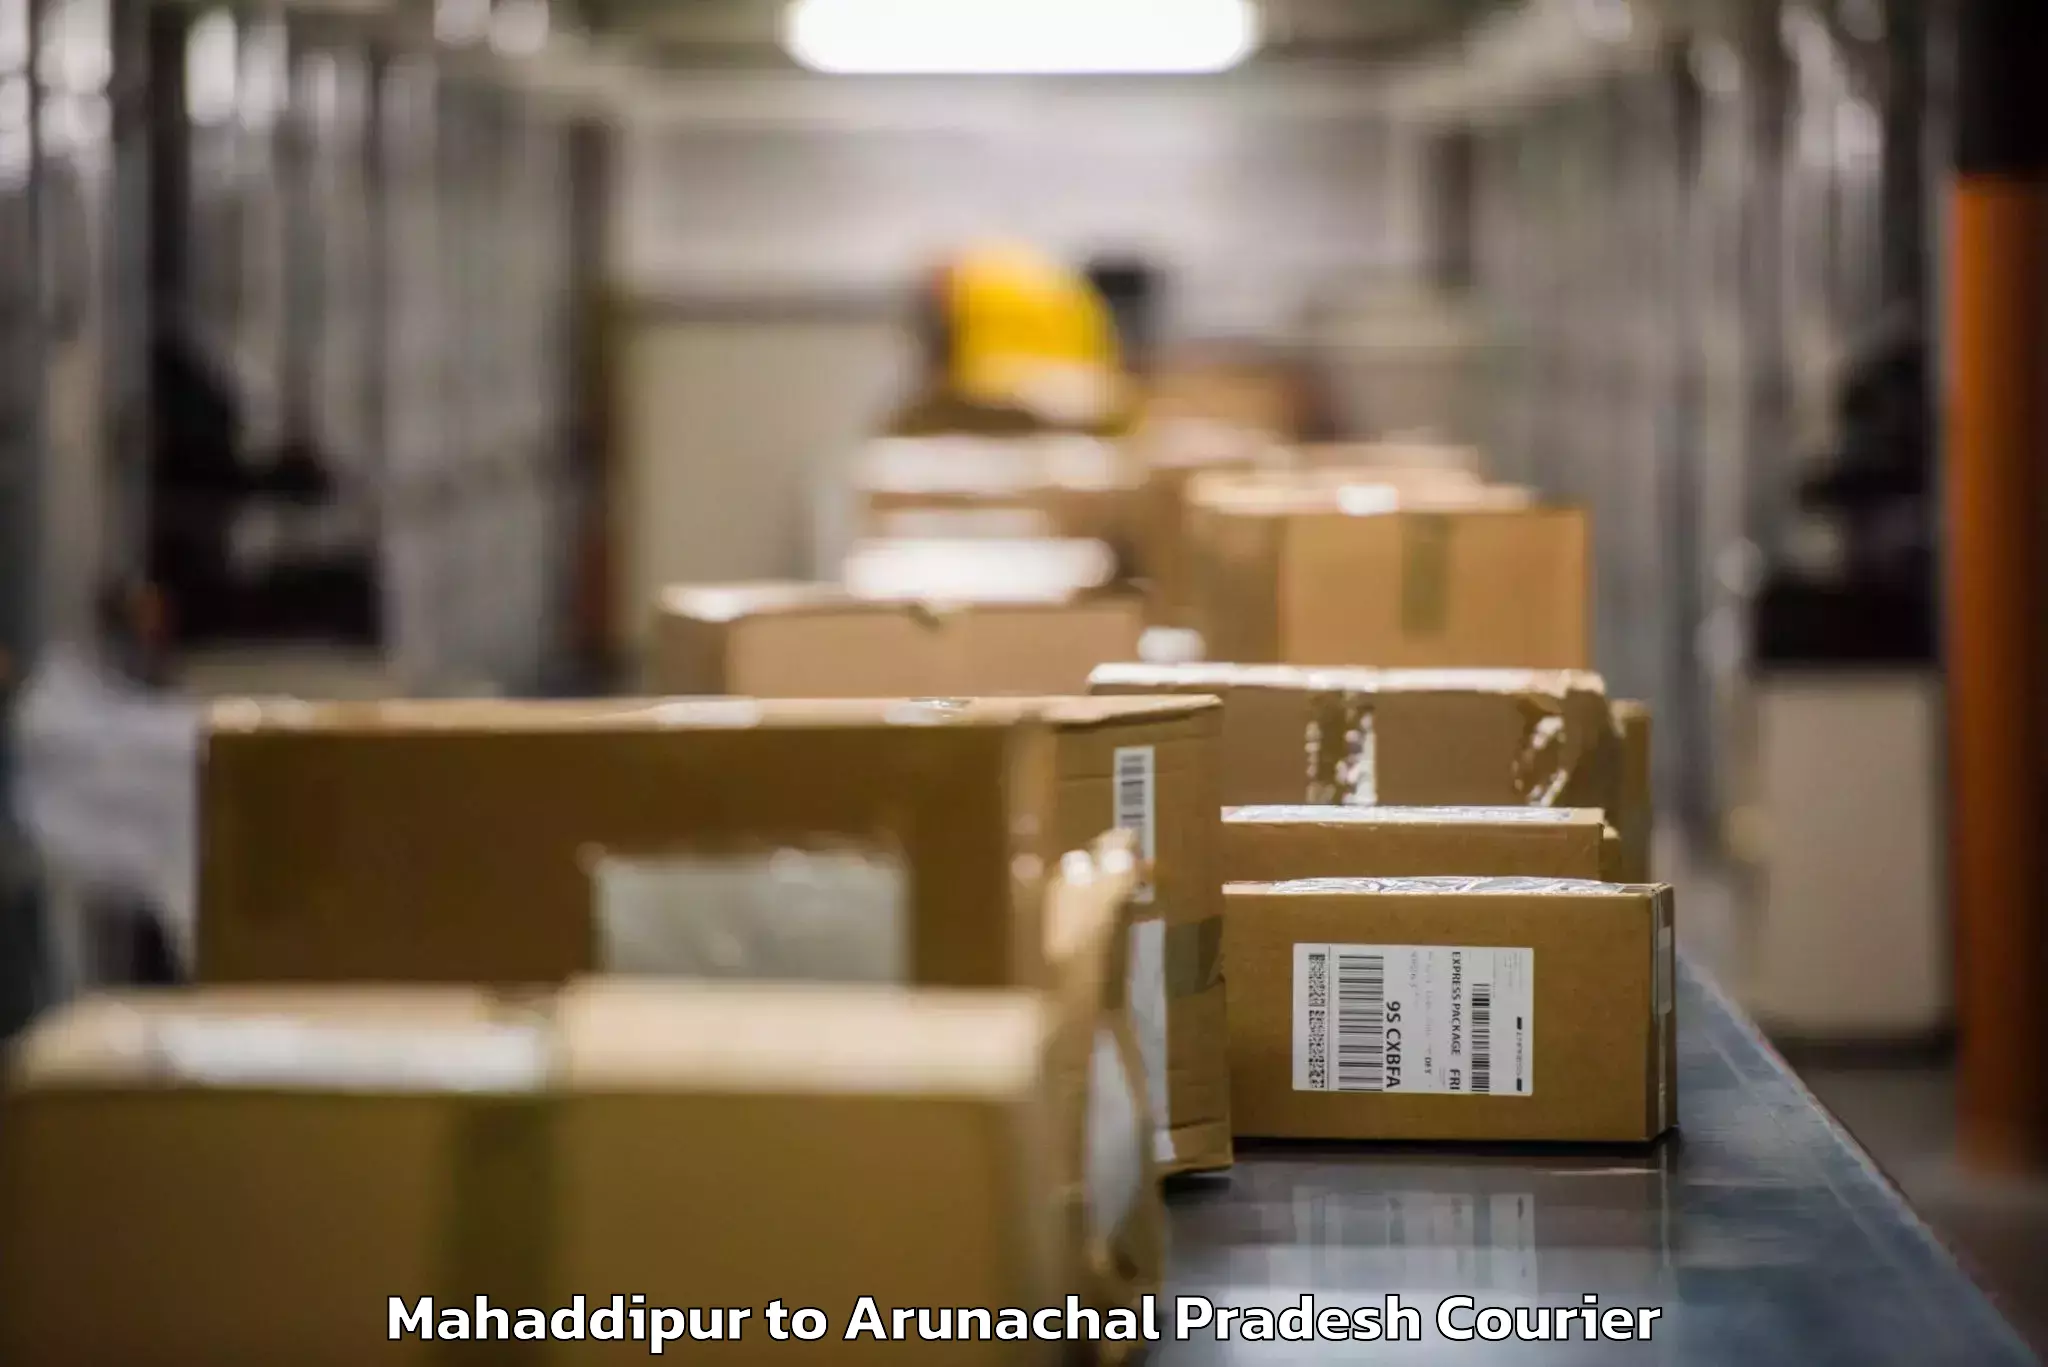 Baggage delivery technology Mahaddipur to Aalo